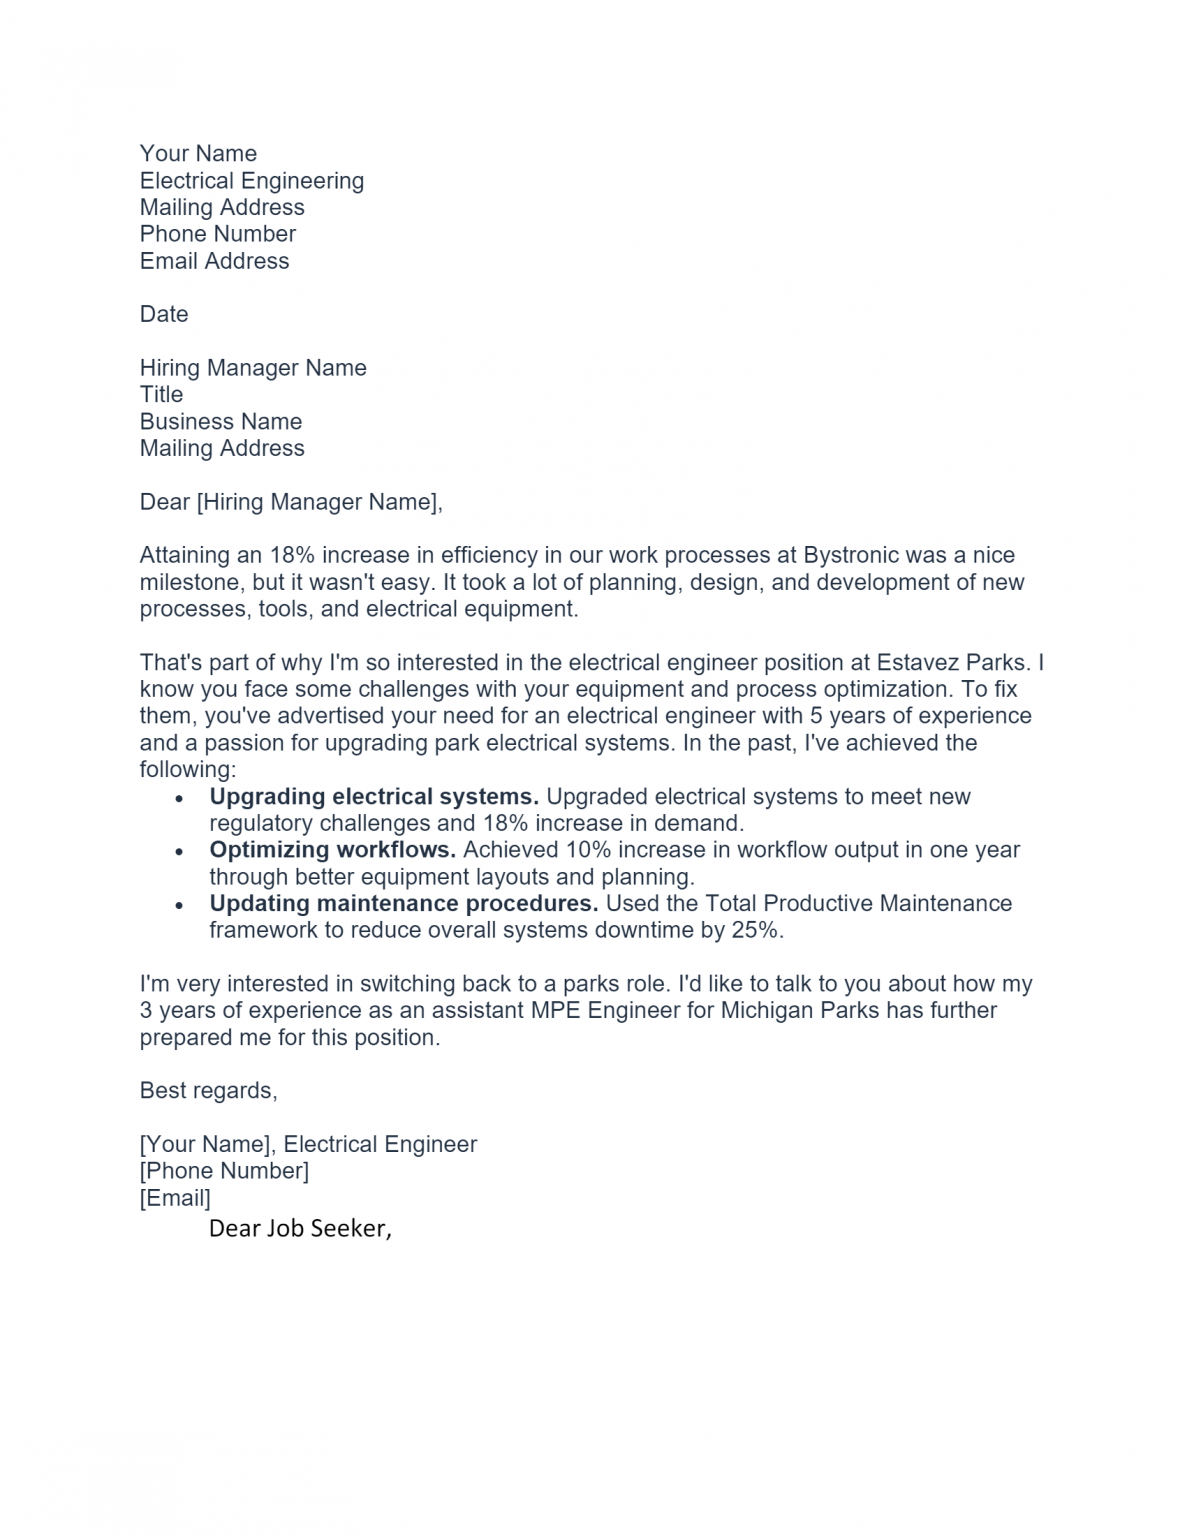 application letter for employment as electrical engineer